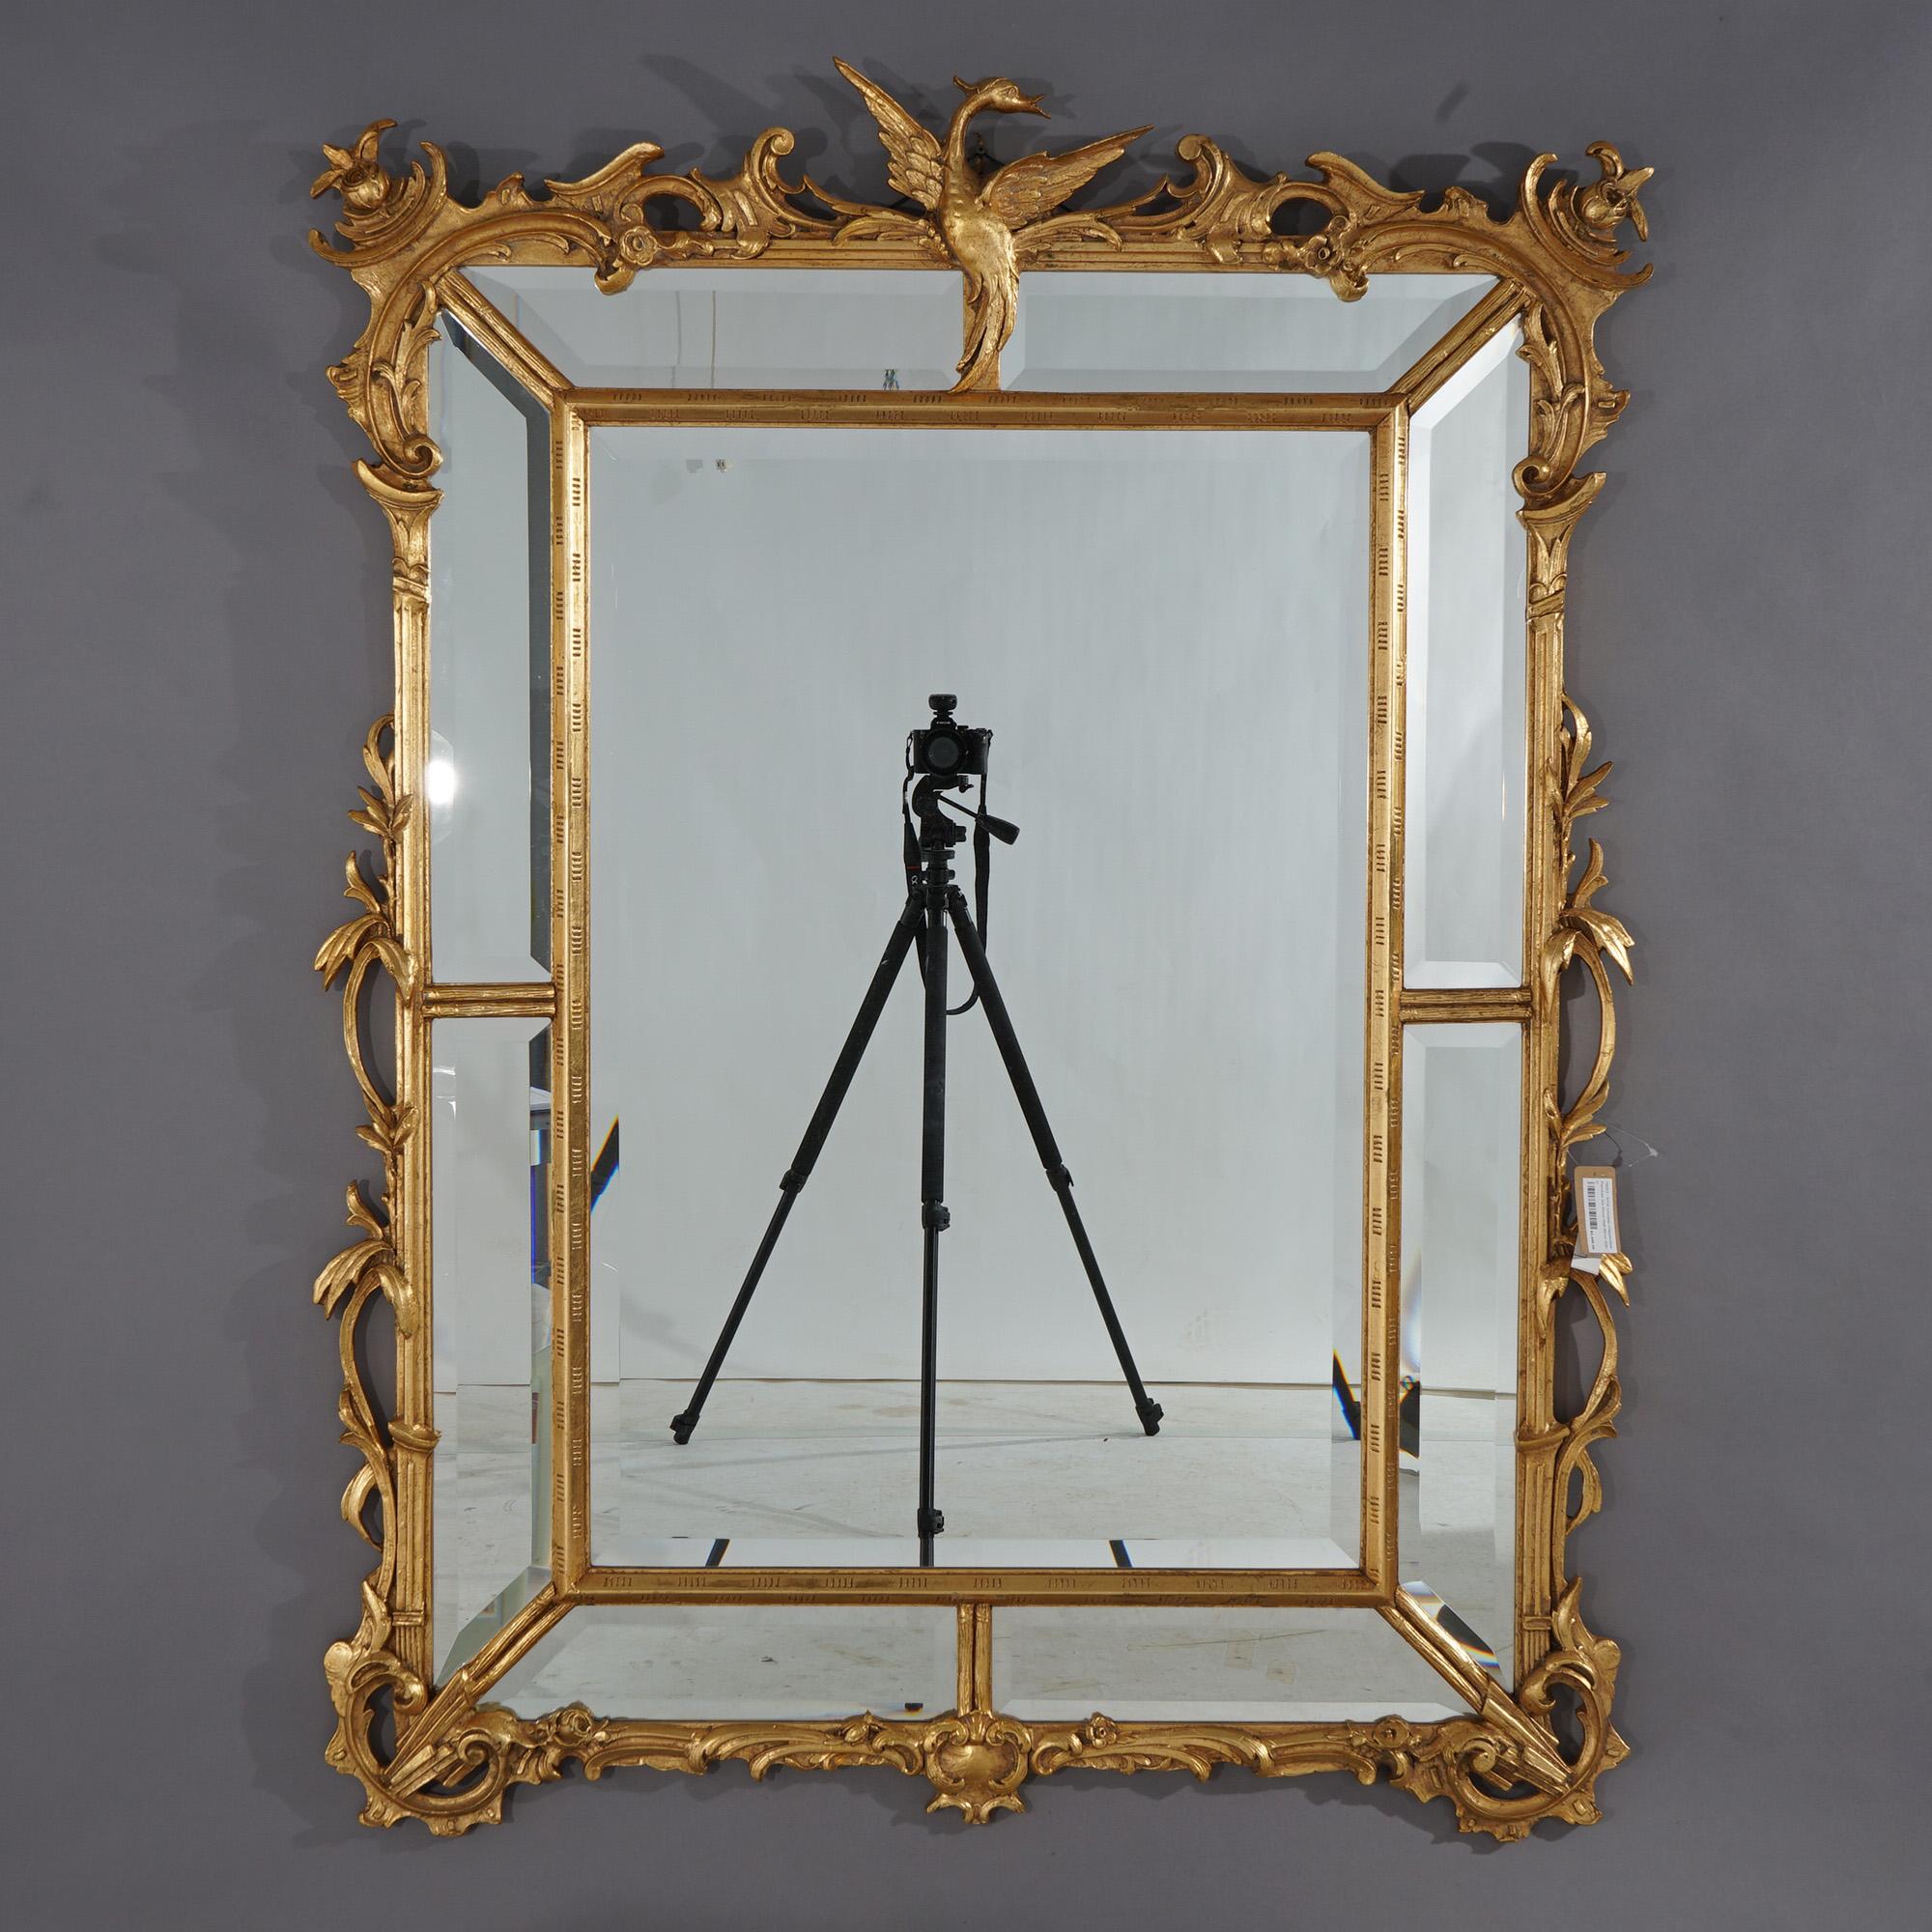 American Figural Chinese Chippendale Parclose Giltwood Wall Mirror with Phoenix 20th C For Sale